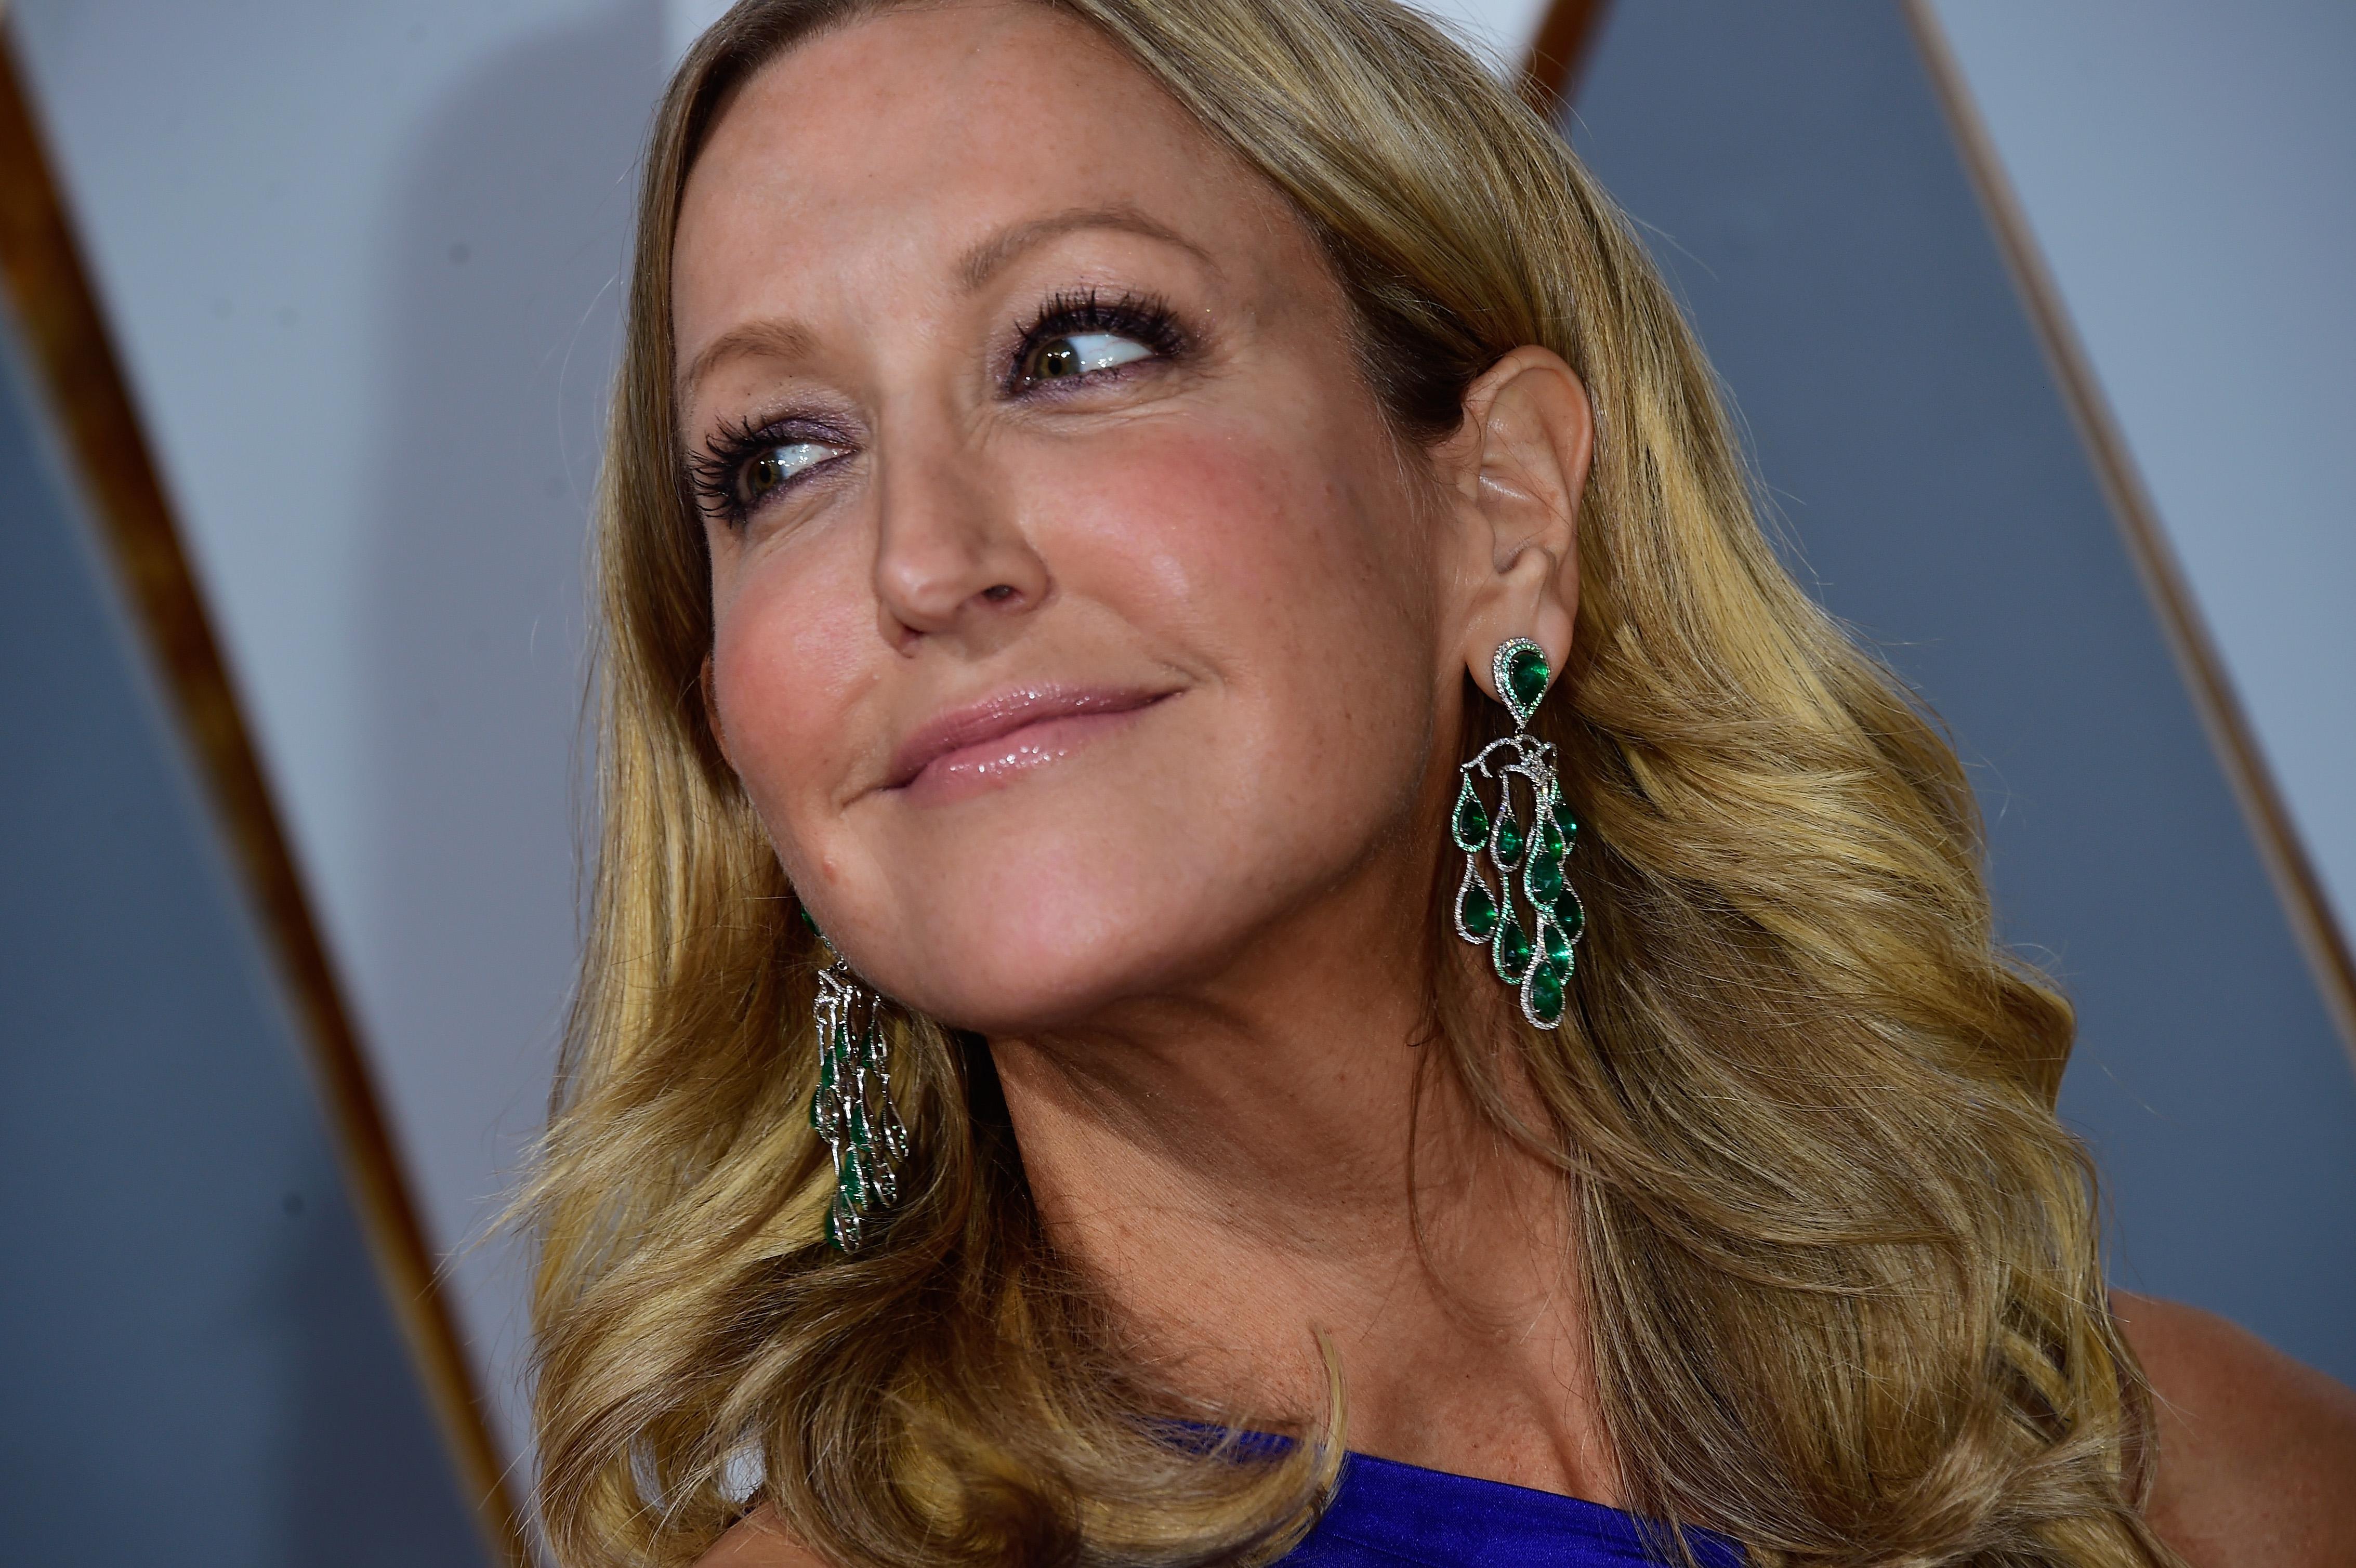 Video Lara Spencer Says She's 'Feeling Great' After Hip Replacement - ABC  News